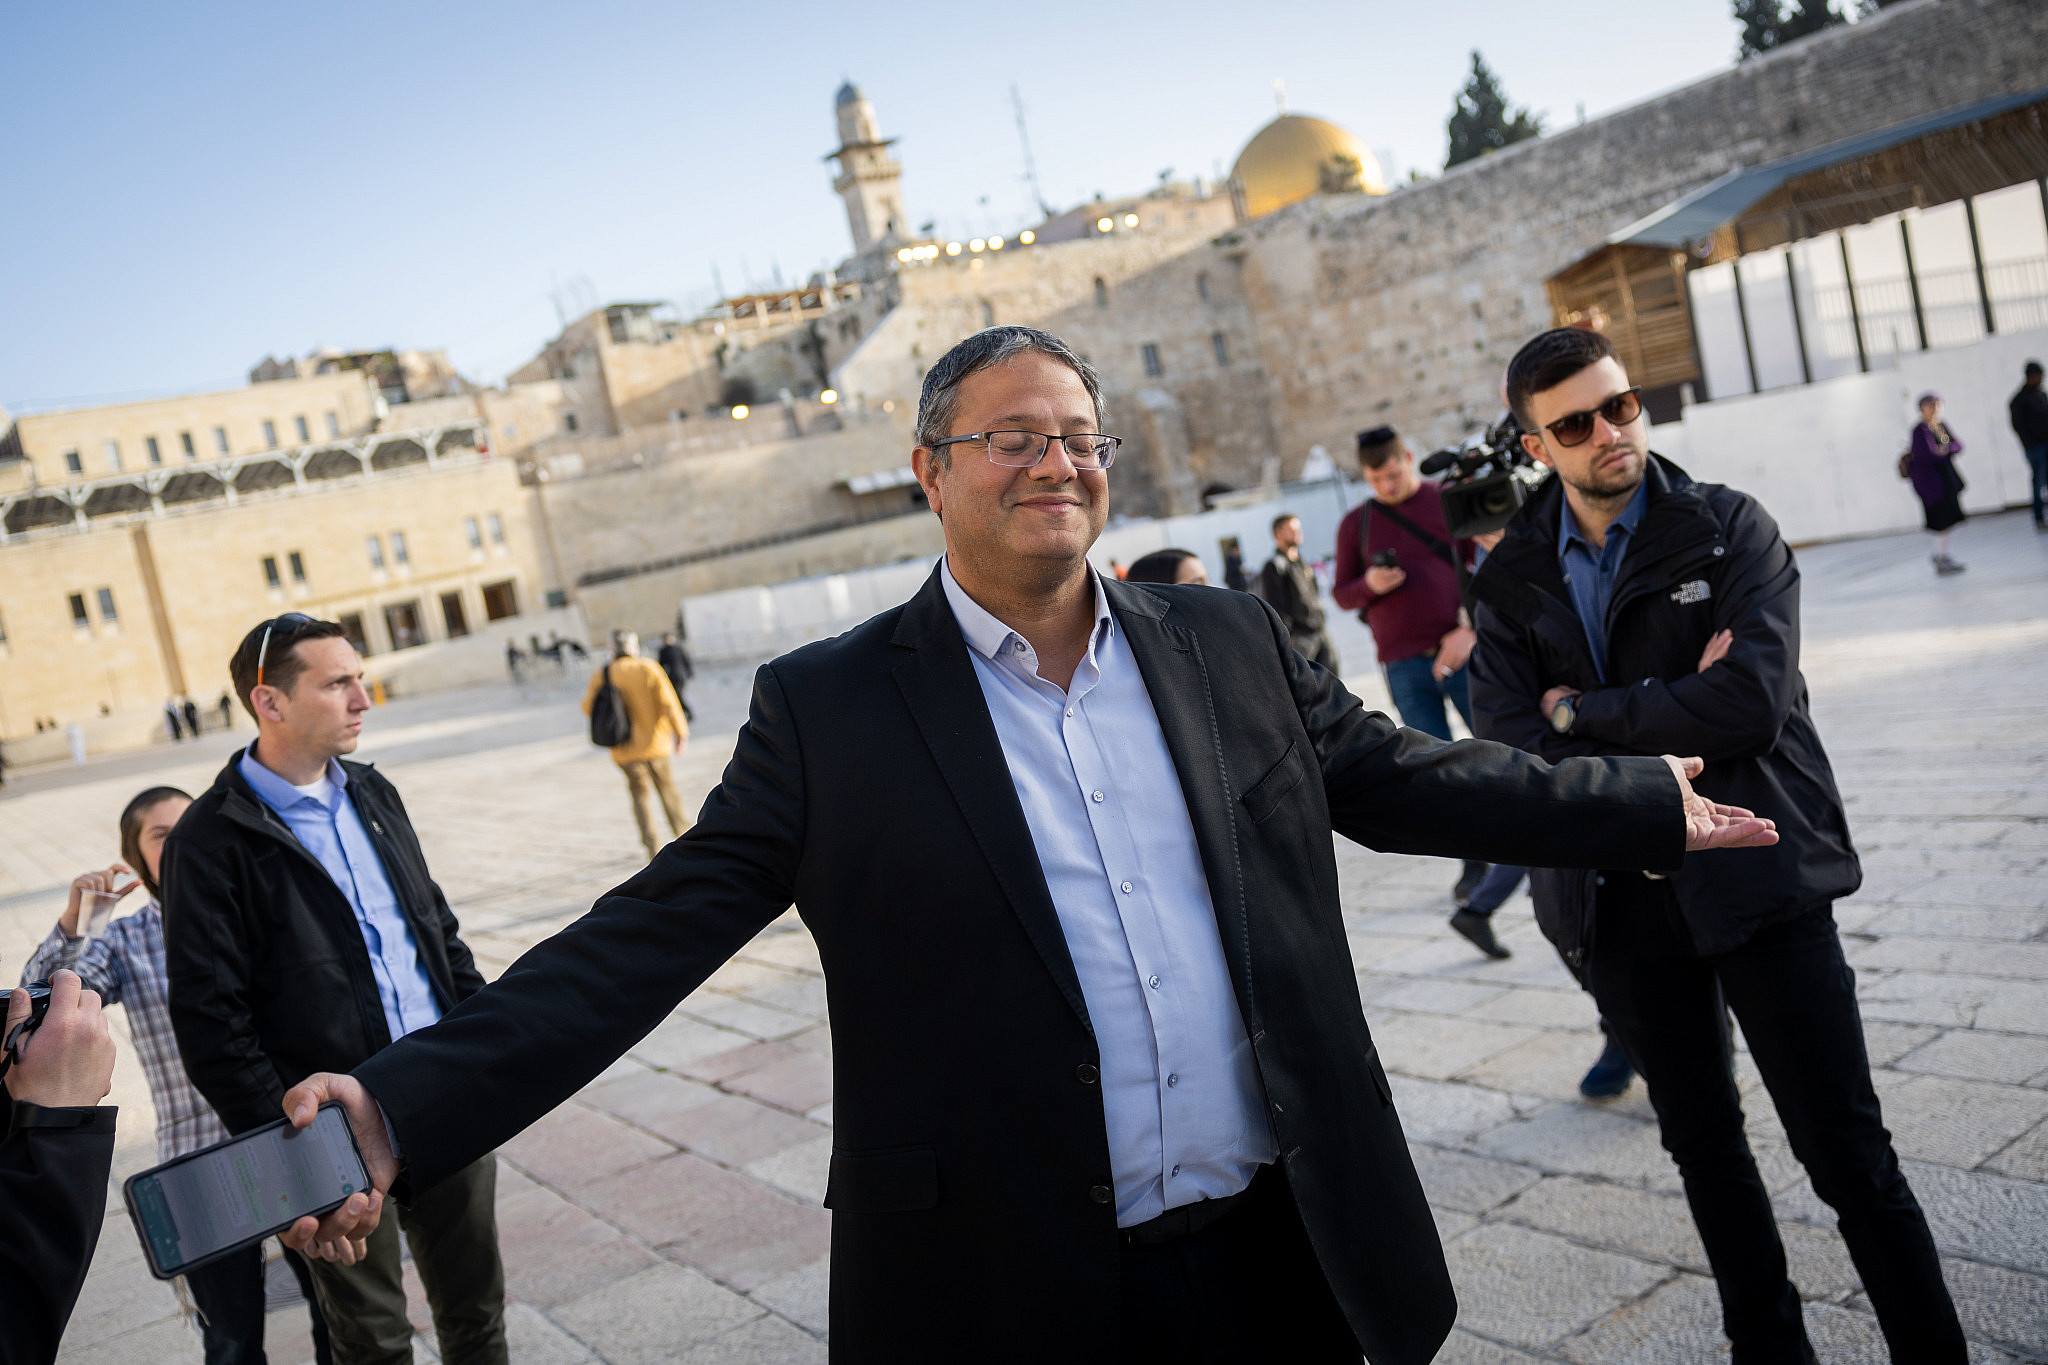 MK Itamar Ben Gvir seen after visiting the Temple Mount, at the Western Wall in Jerusalem's Old City, March 31, 2022. (Yonatan Sindel/Flash90)